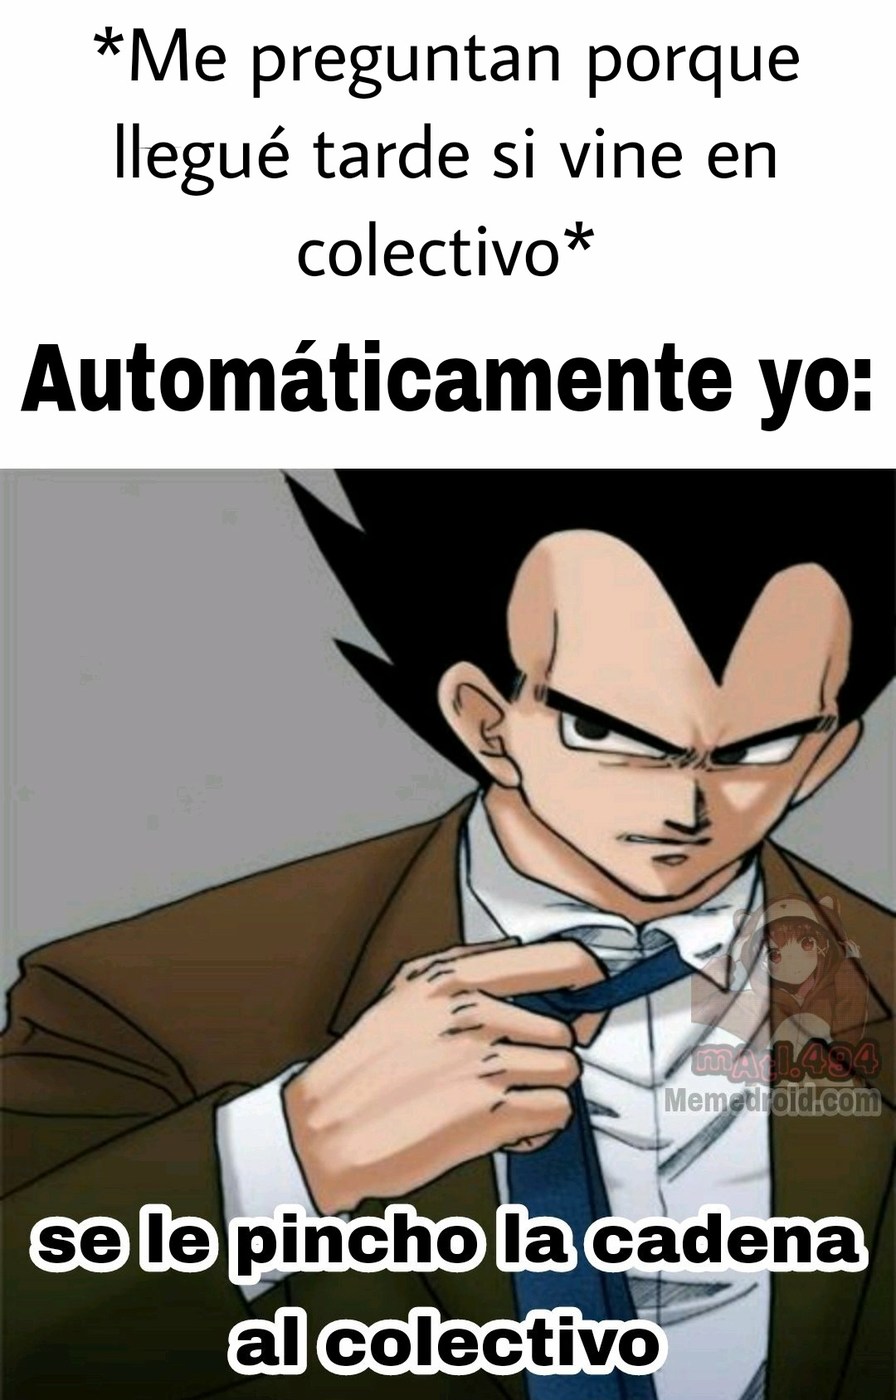 Vuelvo a hacer memes?